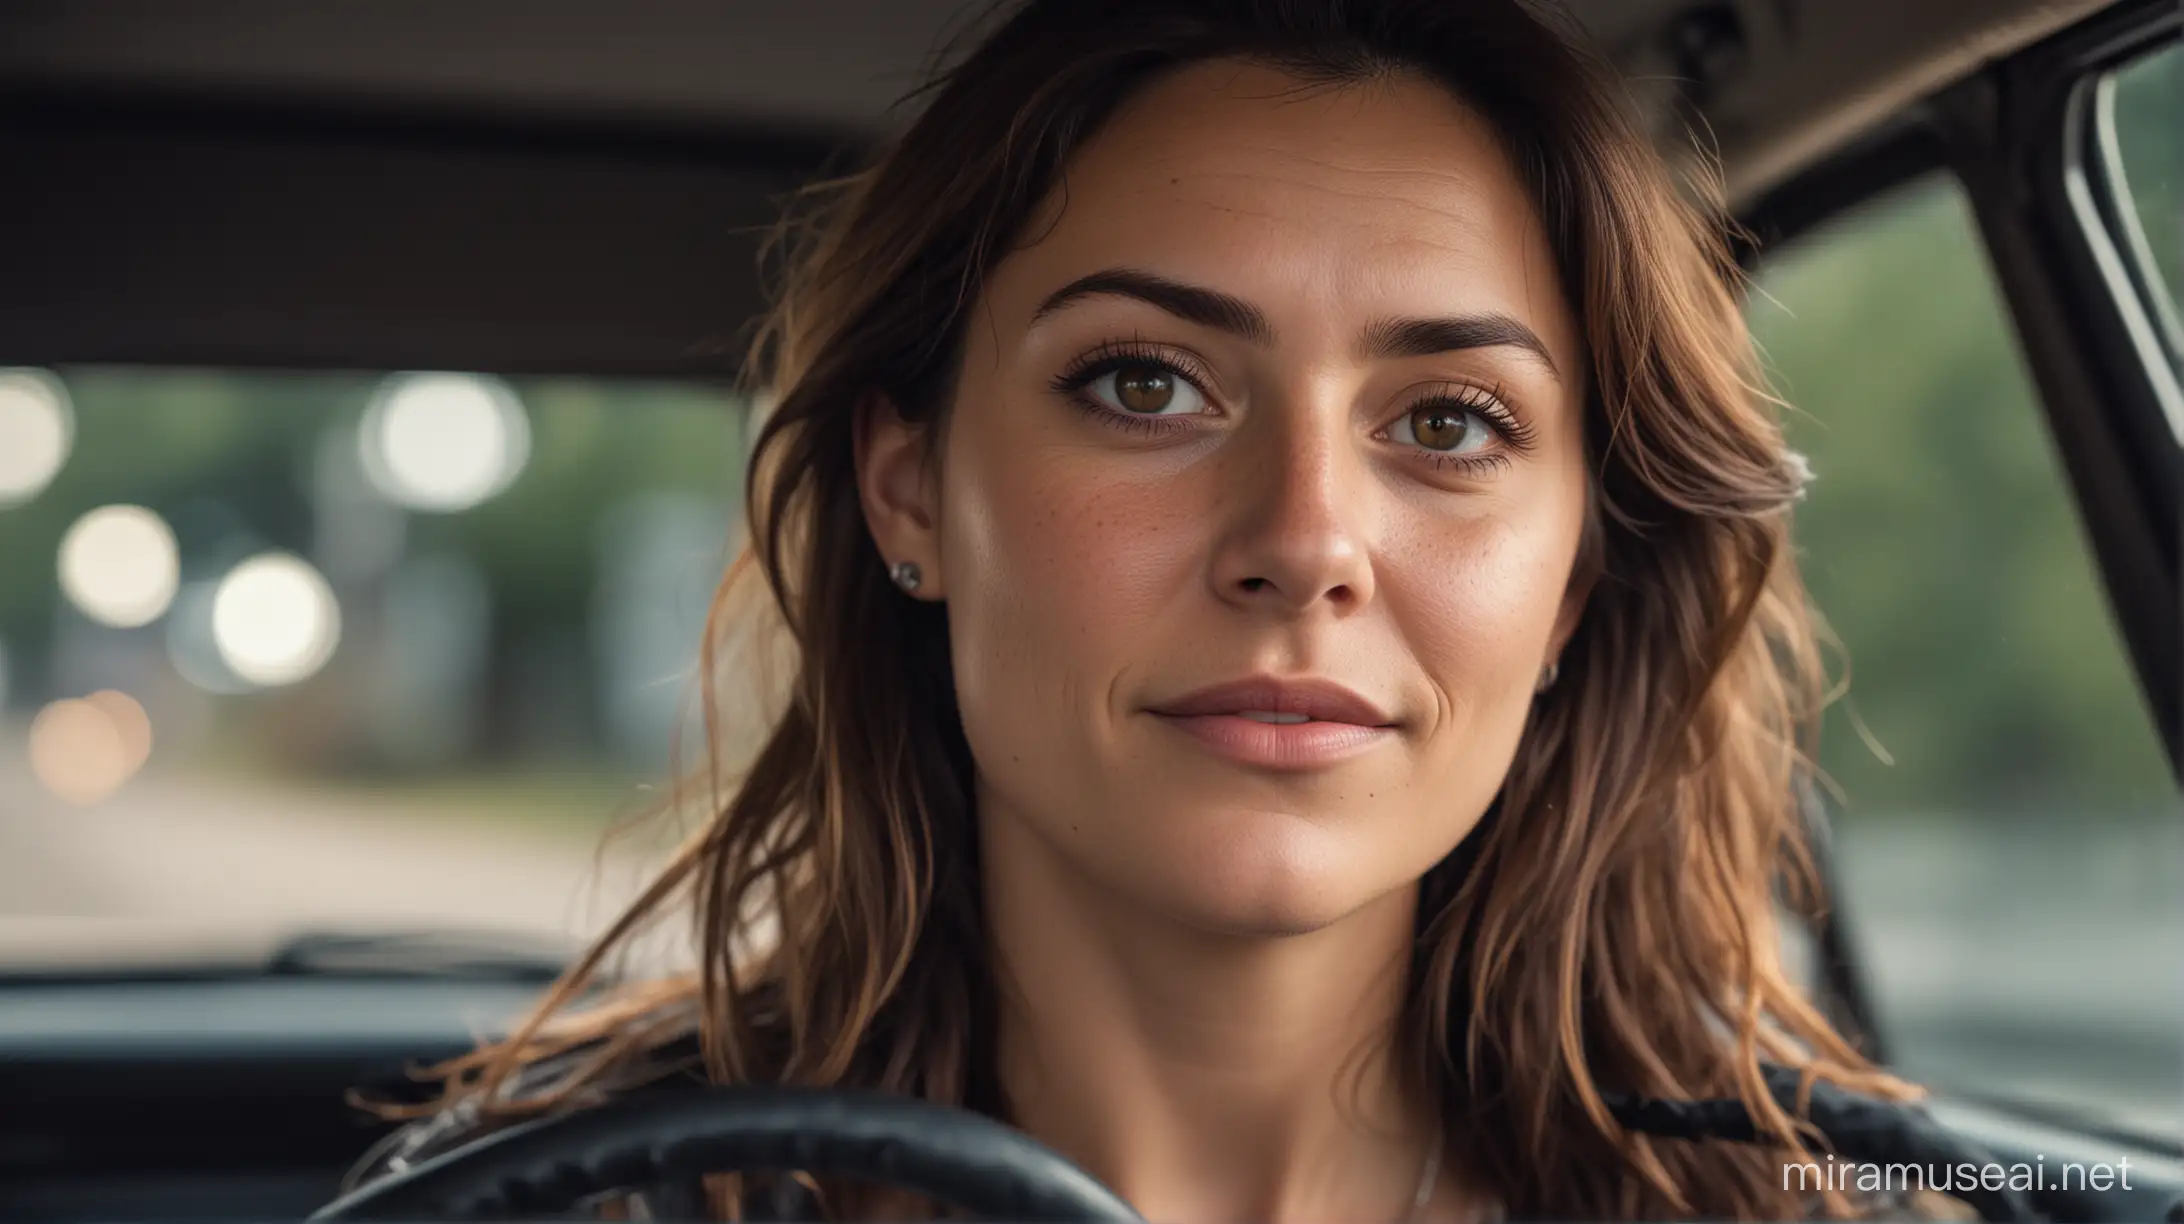 Emotional, harmonious, vignette, highly detailed, bokeh, moody, epic, film grain, grainy, female, 44 yo, hazel eyes, light skin with freckles, dark brown long wavy hair, casual chic clothing, small scar above right eyebrow, pendant necklace, determined yet approachable expression, driving a car, dynamic pose,16:9 ratio, centered, depth of field, 55mm, atmospheric lighting, dynamic camera angle, high contrast, close up